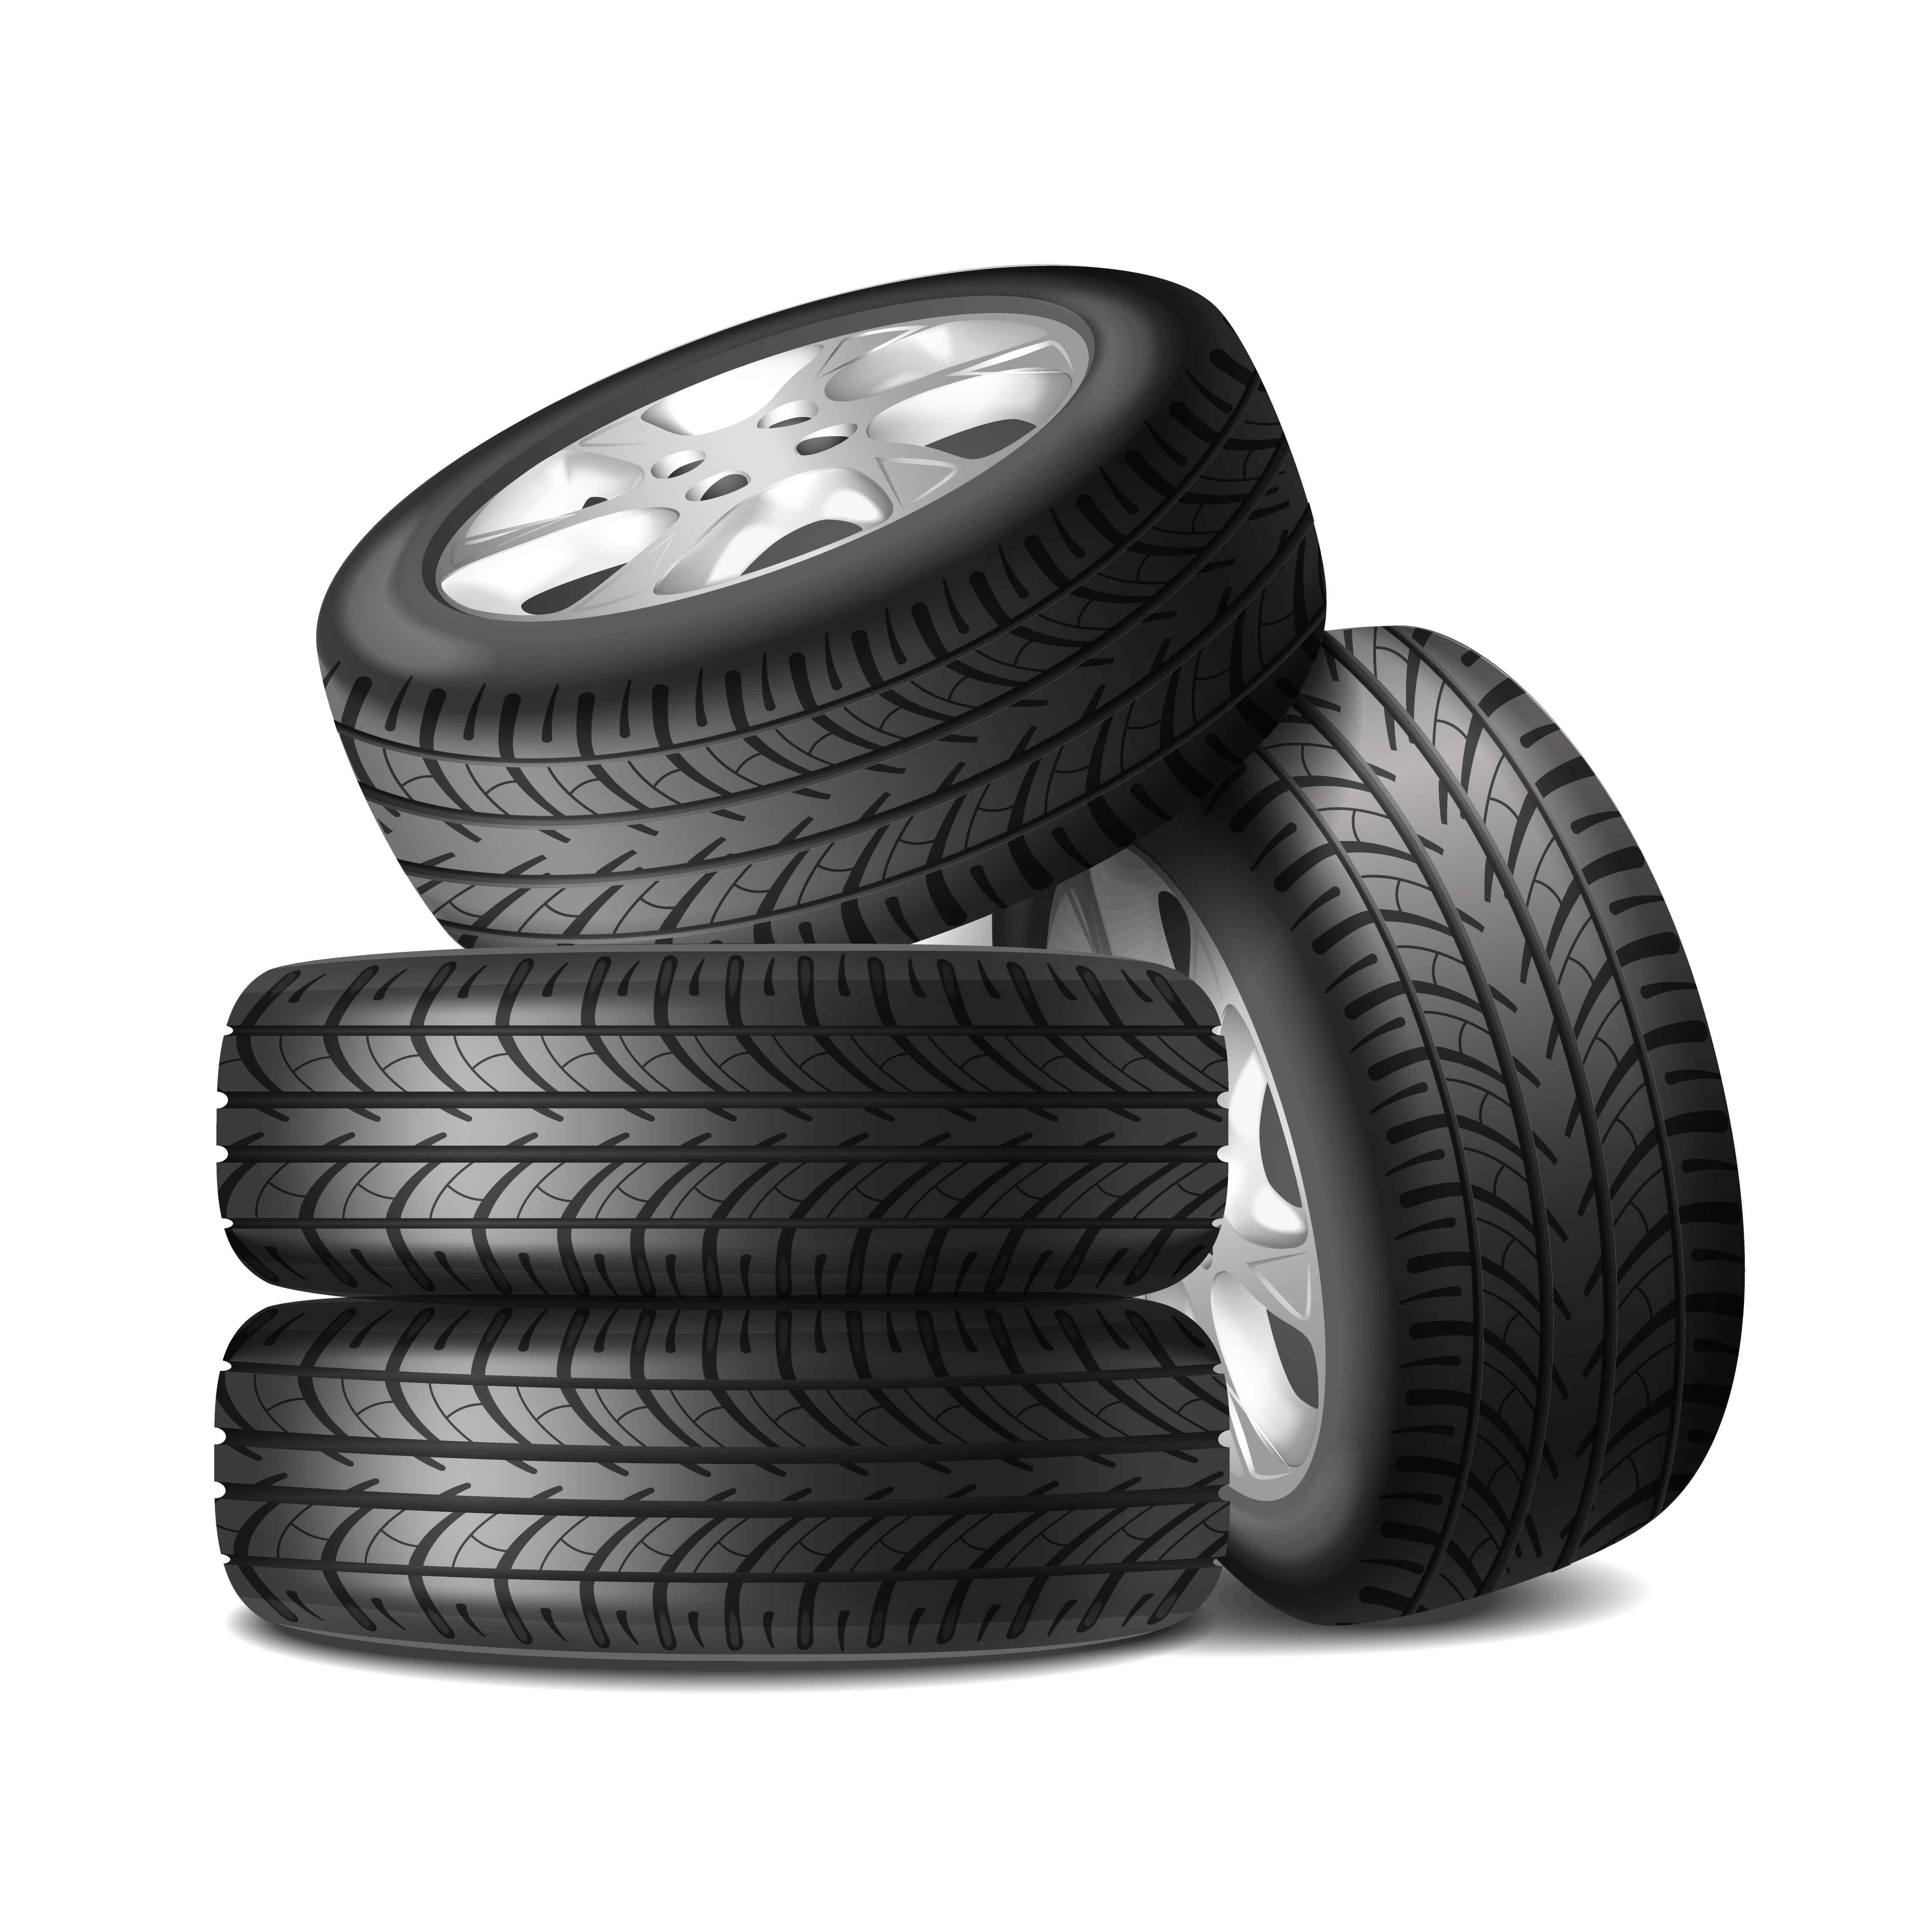 The Benefits Of Regular Car Tire Changes